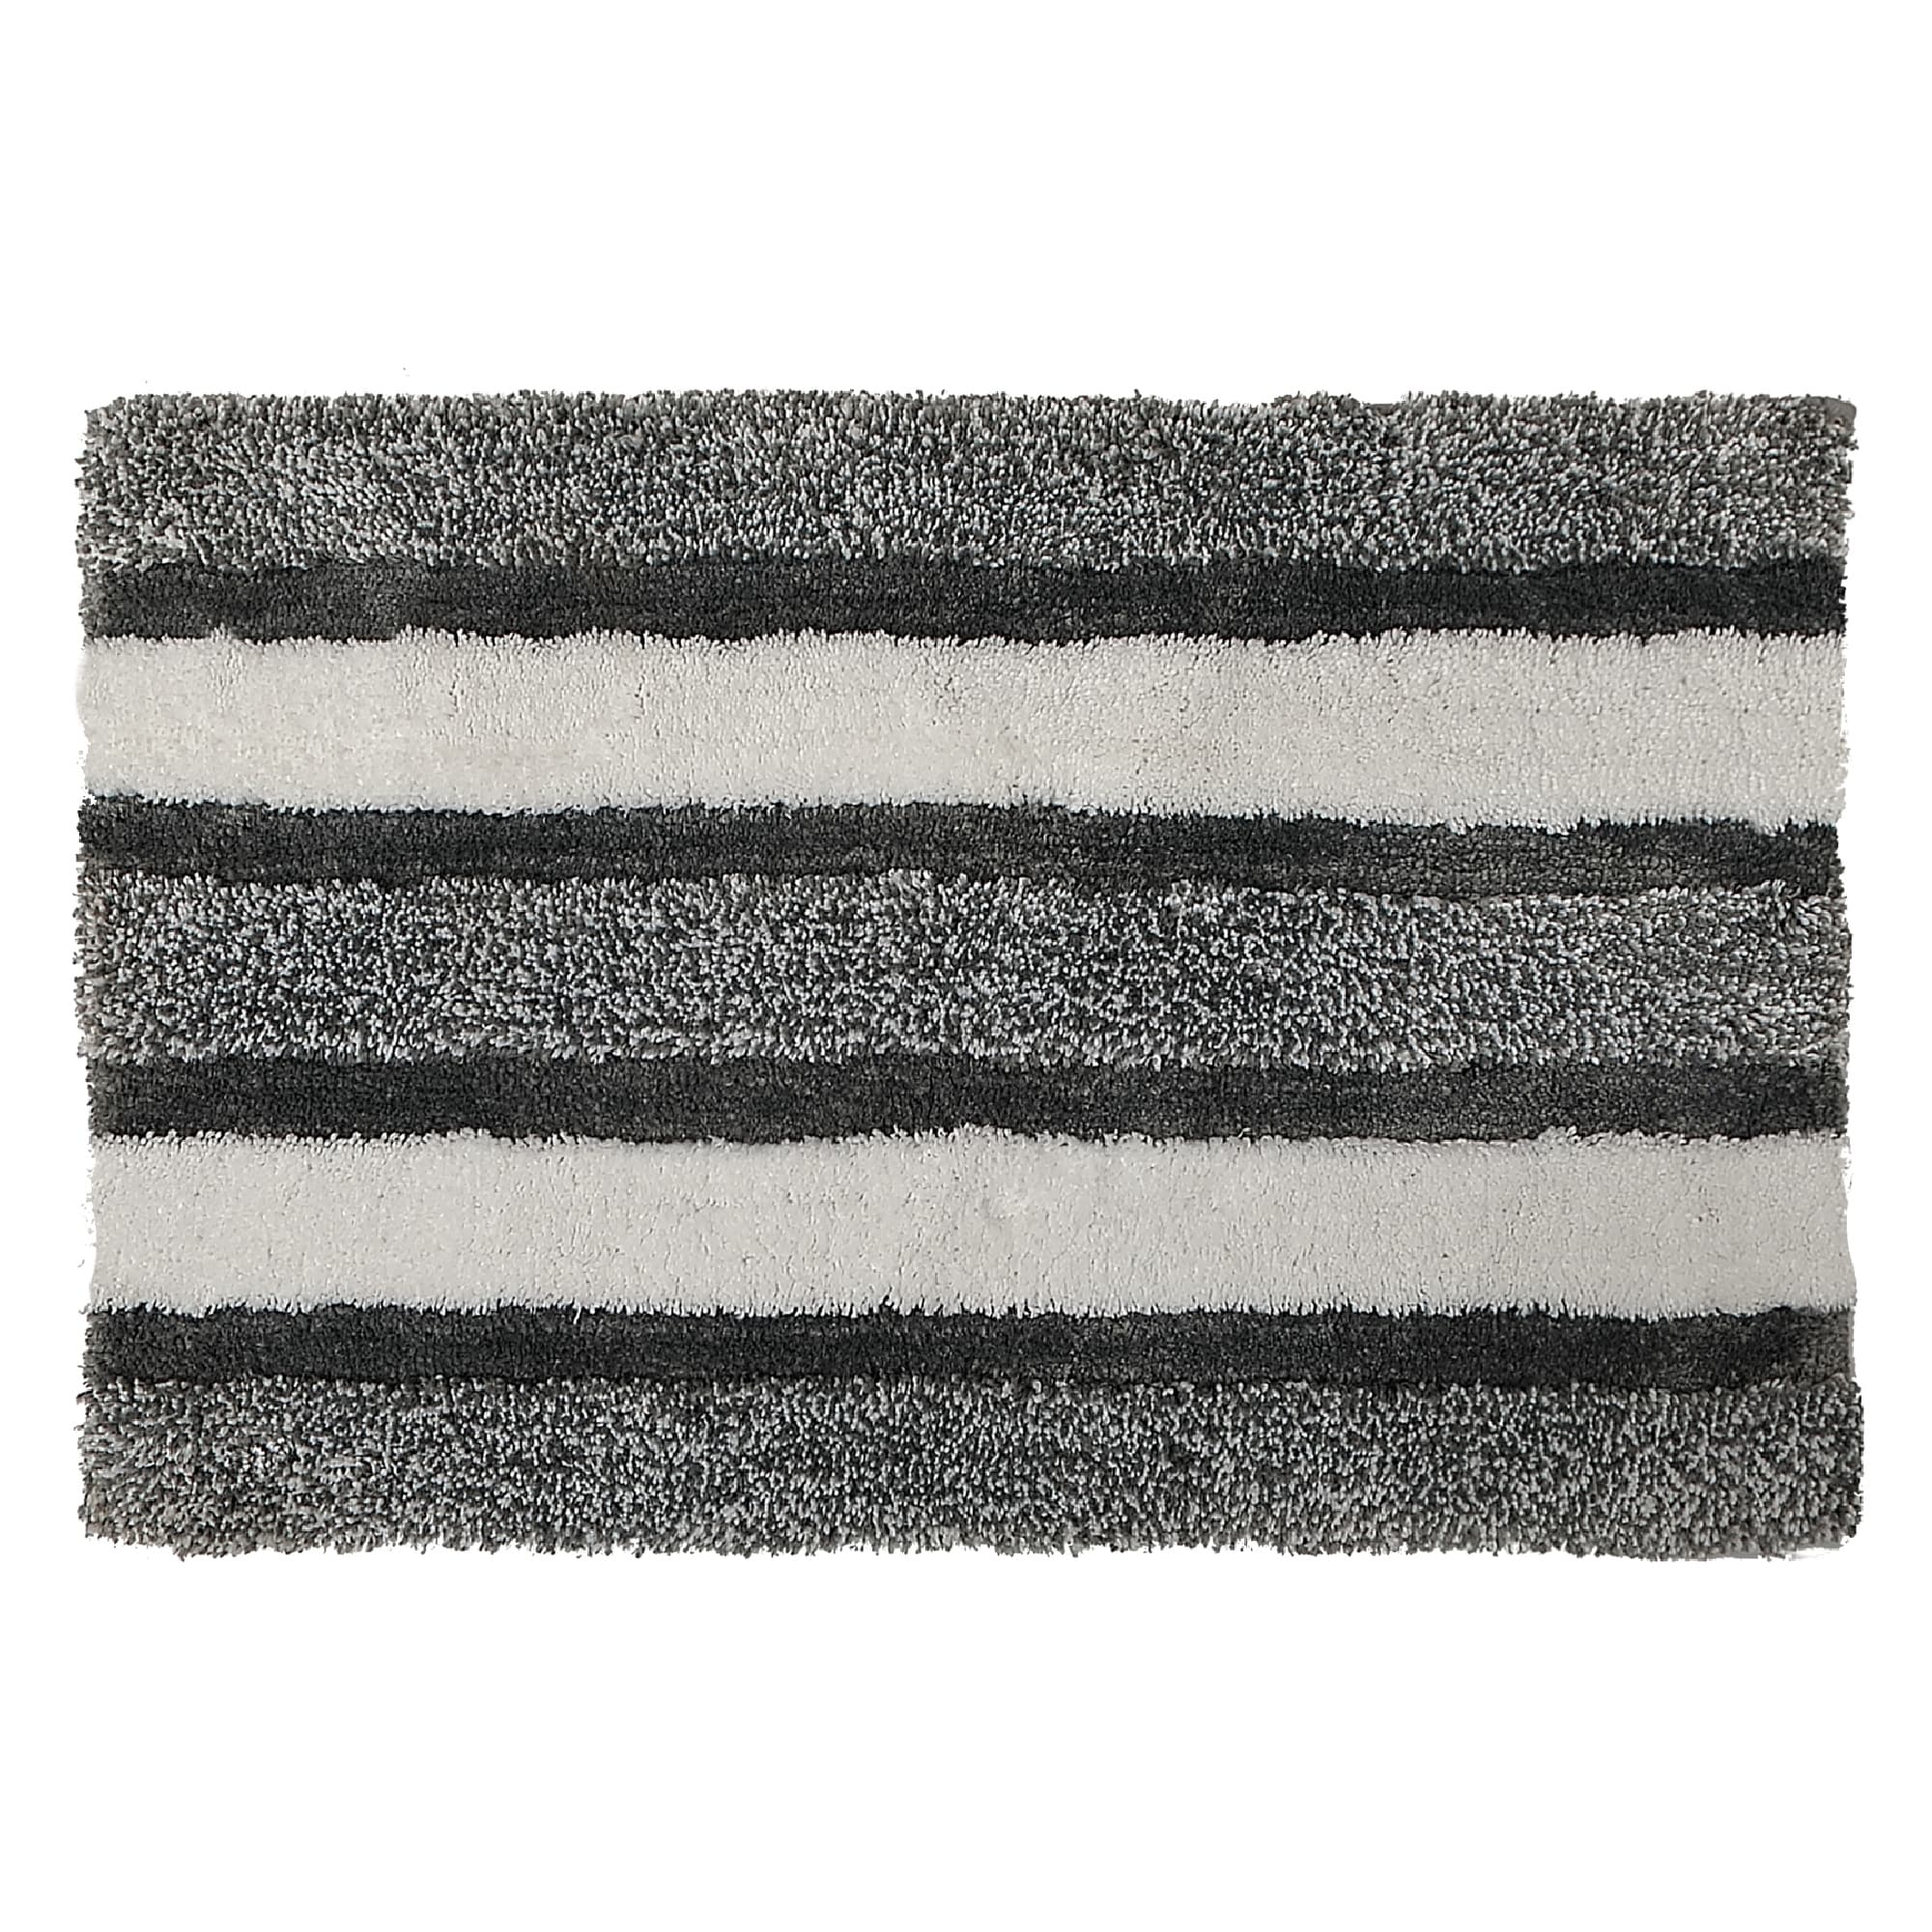 https://ak1.ostkcdn.com/images/products/is/images/direct/aa9dac52c1bf0c576e450a1a2f34a8fe17f3cab7/Microfibre-Striped-Bath-Mat-%28Gray%29-%2820-X-32%29.jpg